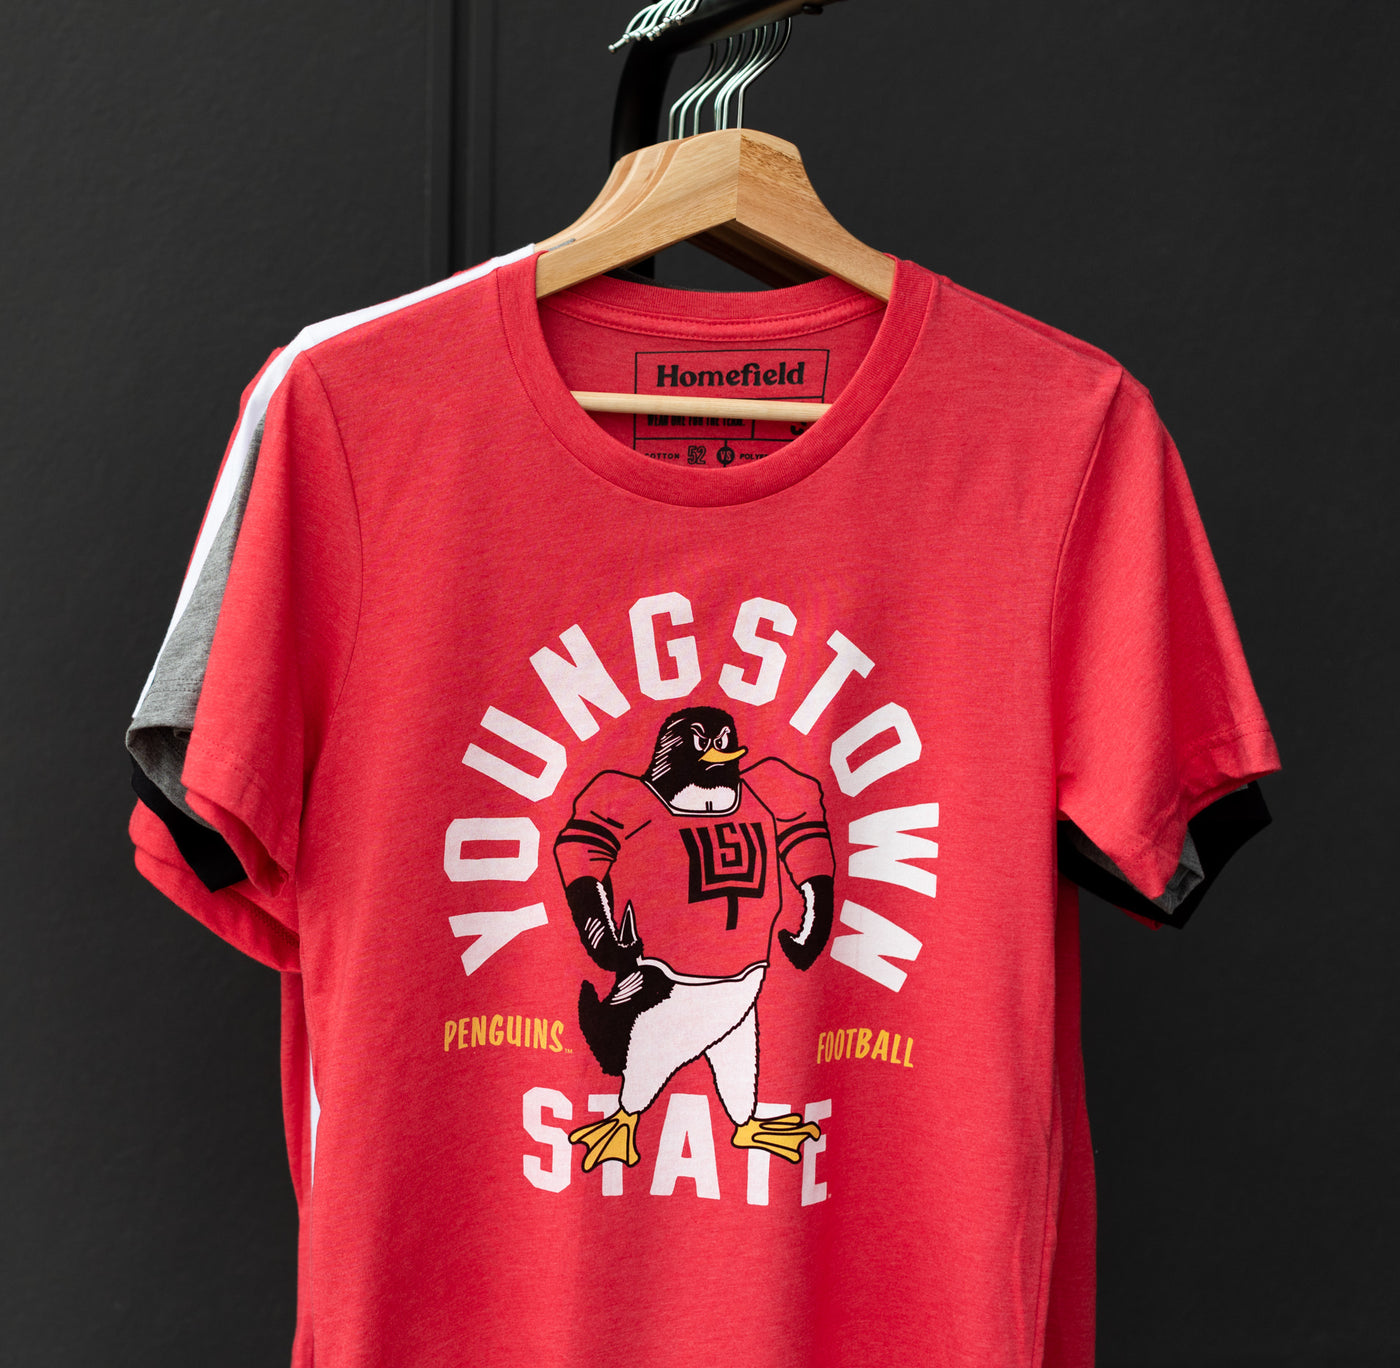 Youngstown State Penguins 1970s Football Tee